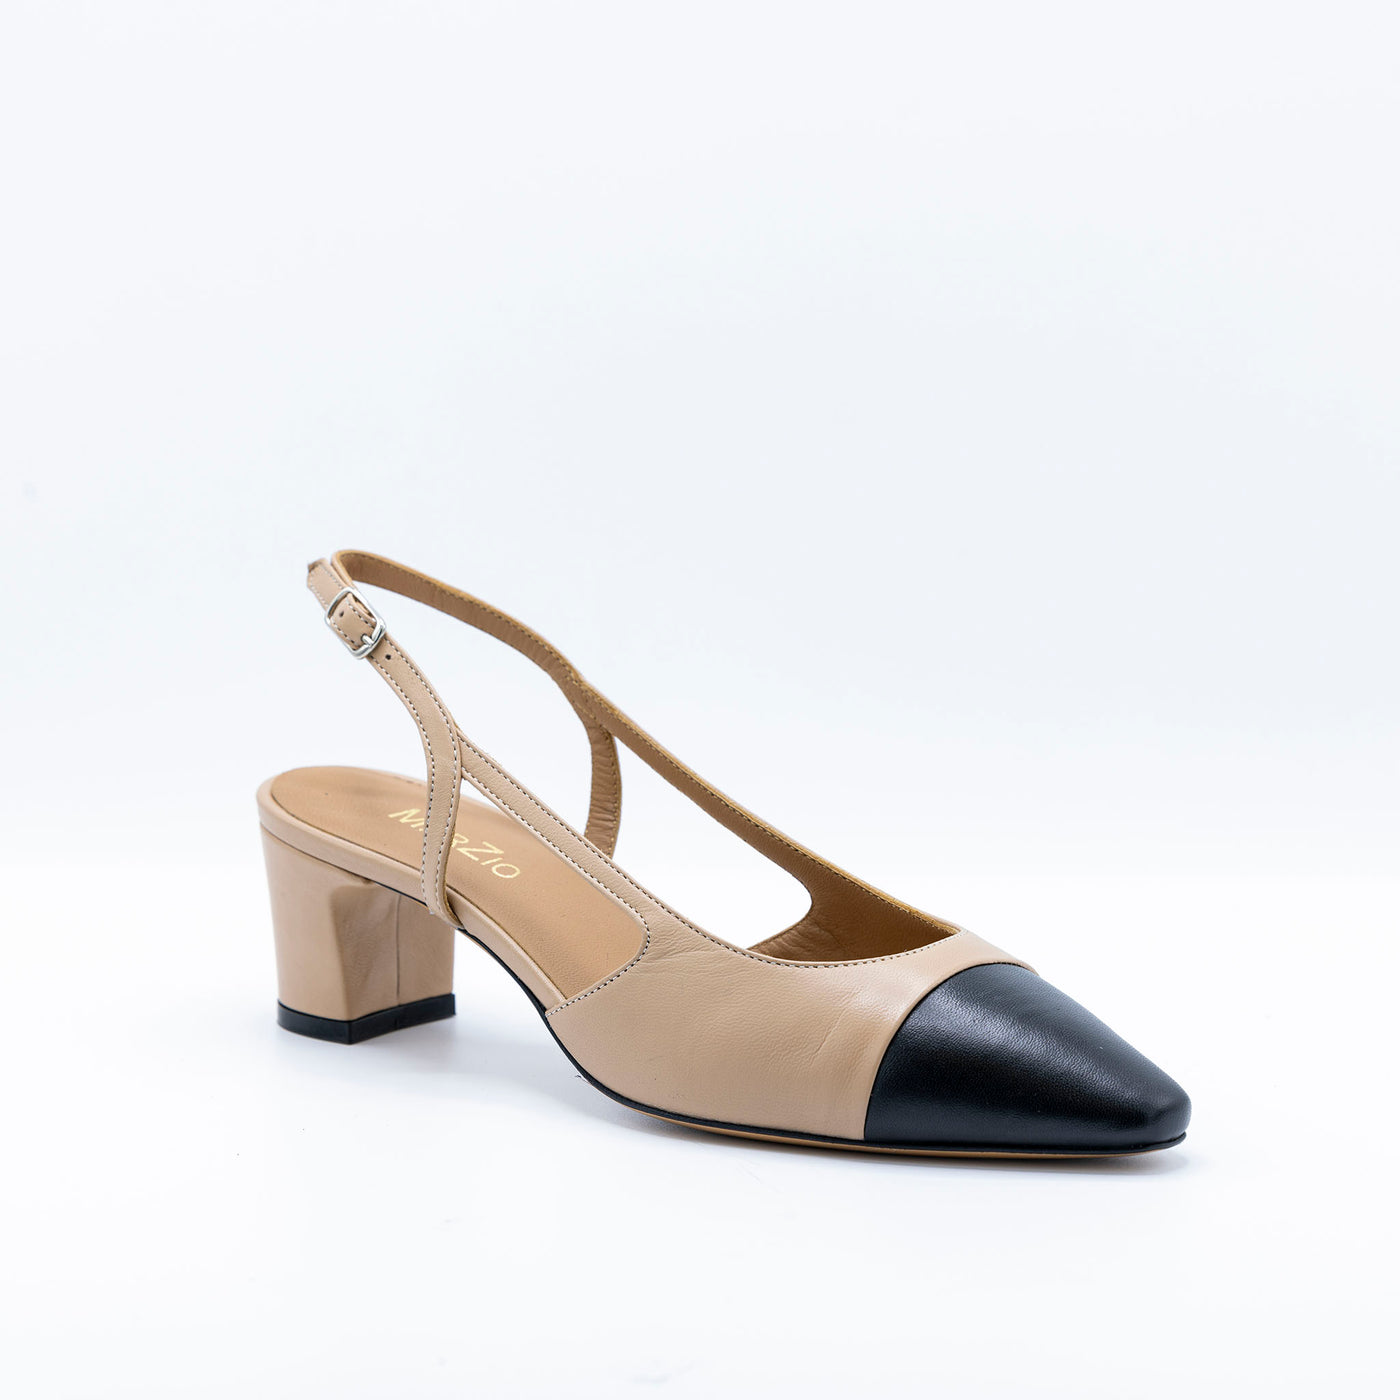 Two-tone Slingback in Beige Leather